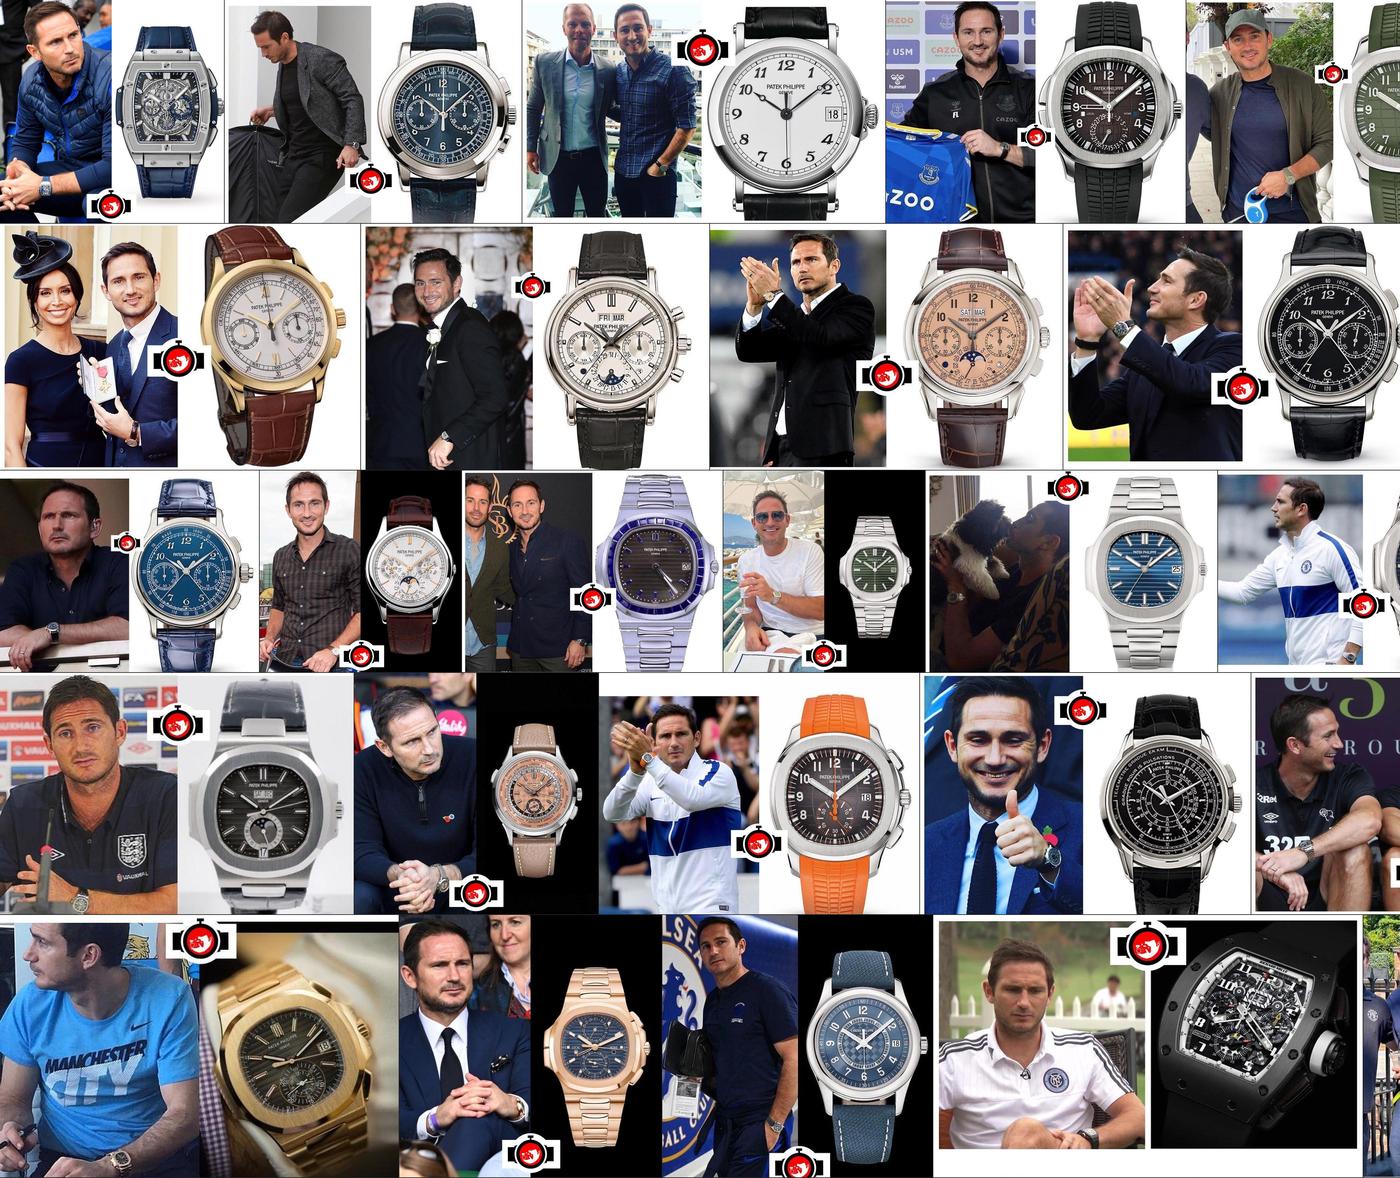 Frank Lampard's Exquisite Watch Collection - A Glimpse into the Football Legend's Timepiece Obsession